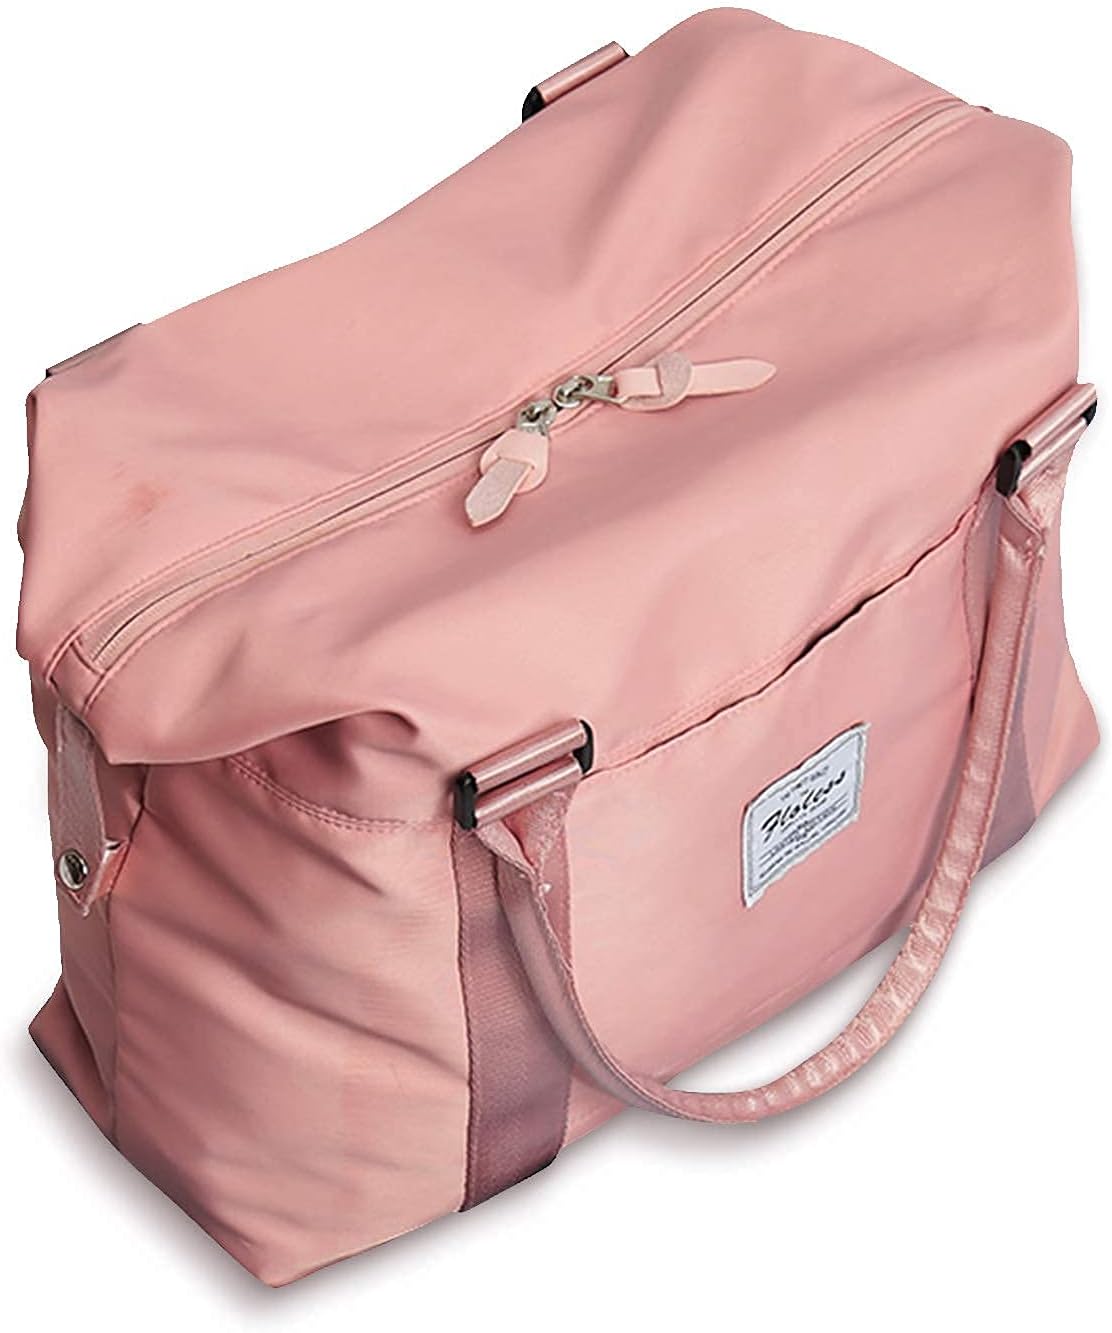 Womens travel bags, weekender carry on for women, [...]